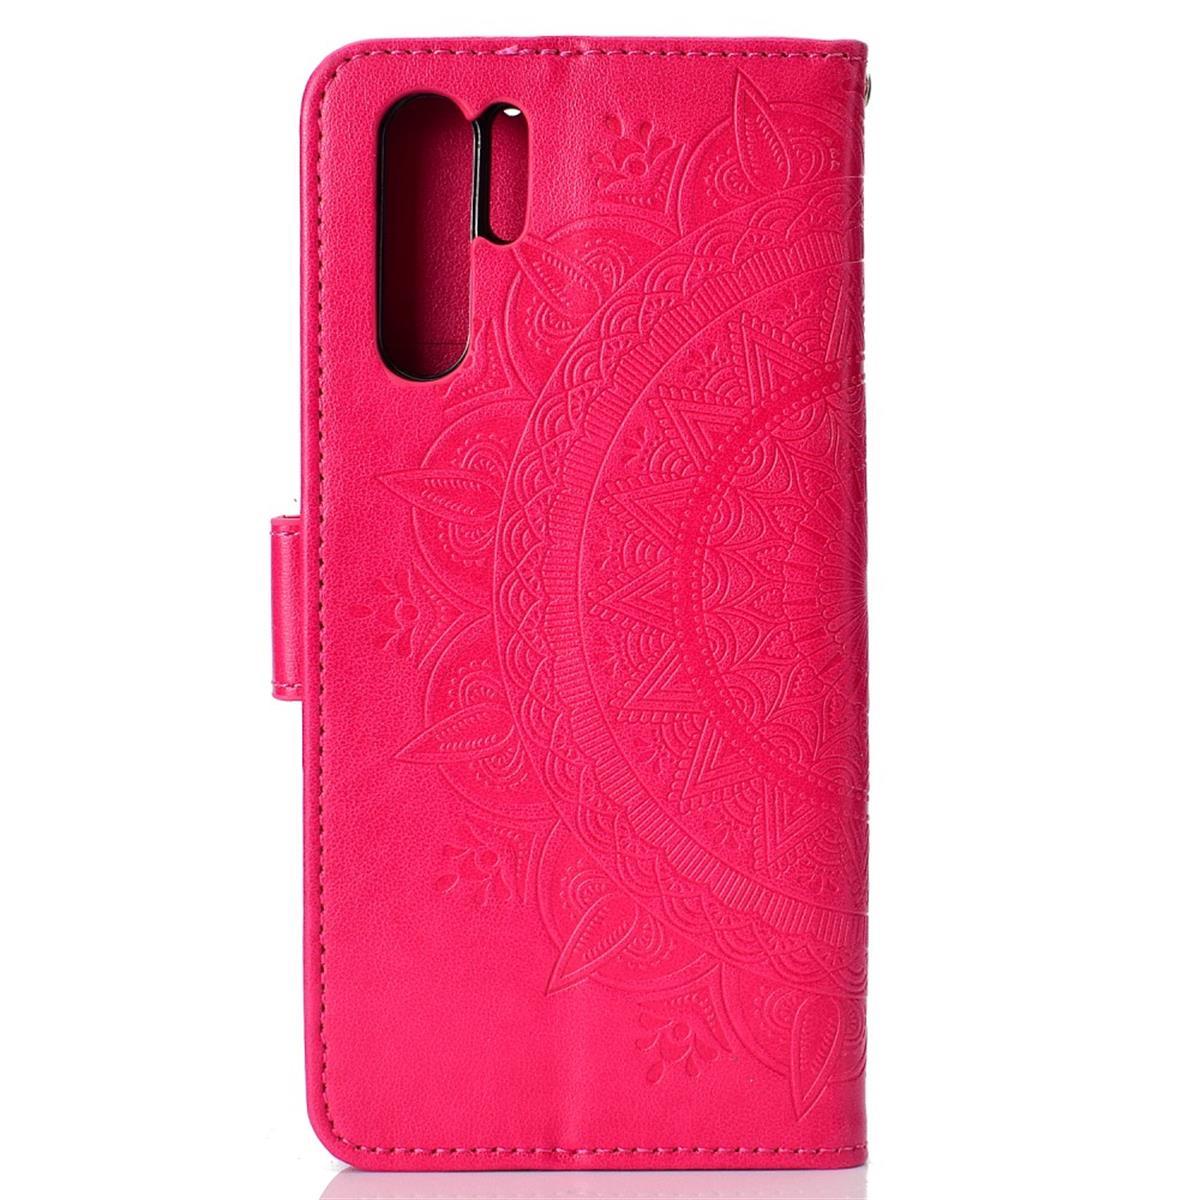 mit Pink Huawei, Bookcover, Klapphülle Muster, P30 COVERKINGZ Pro, Mandala